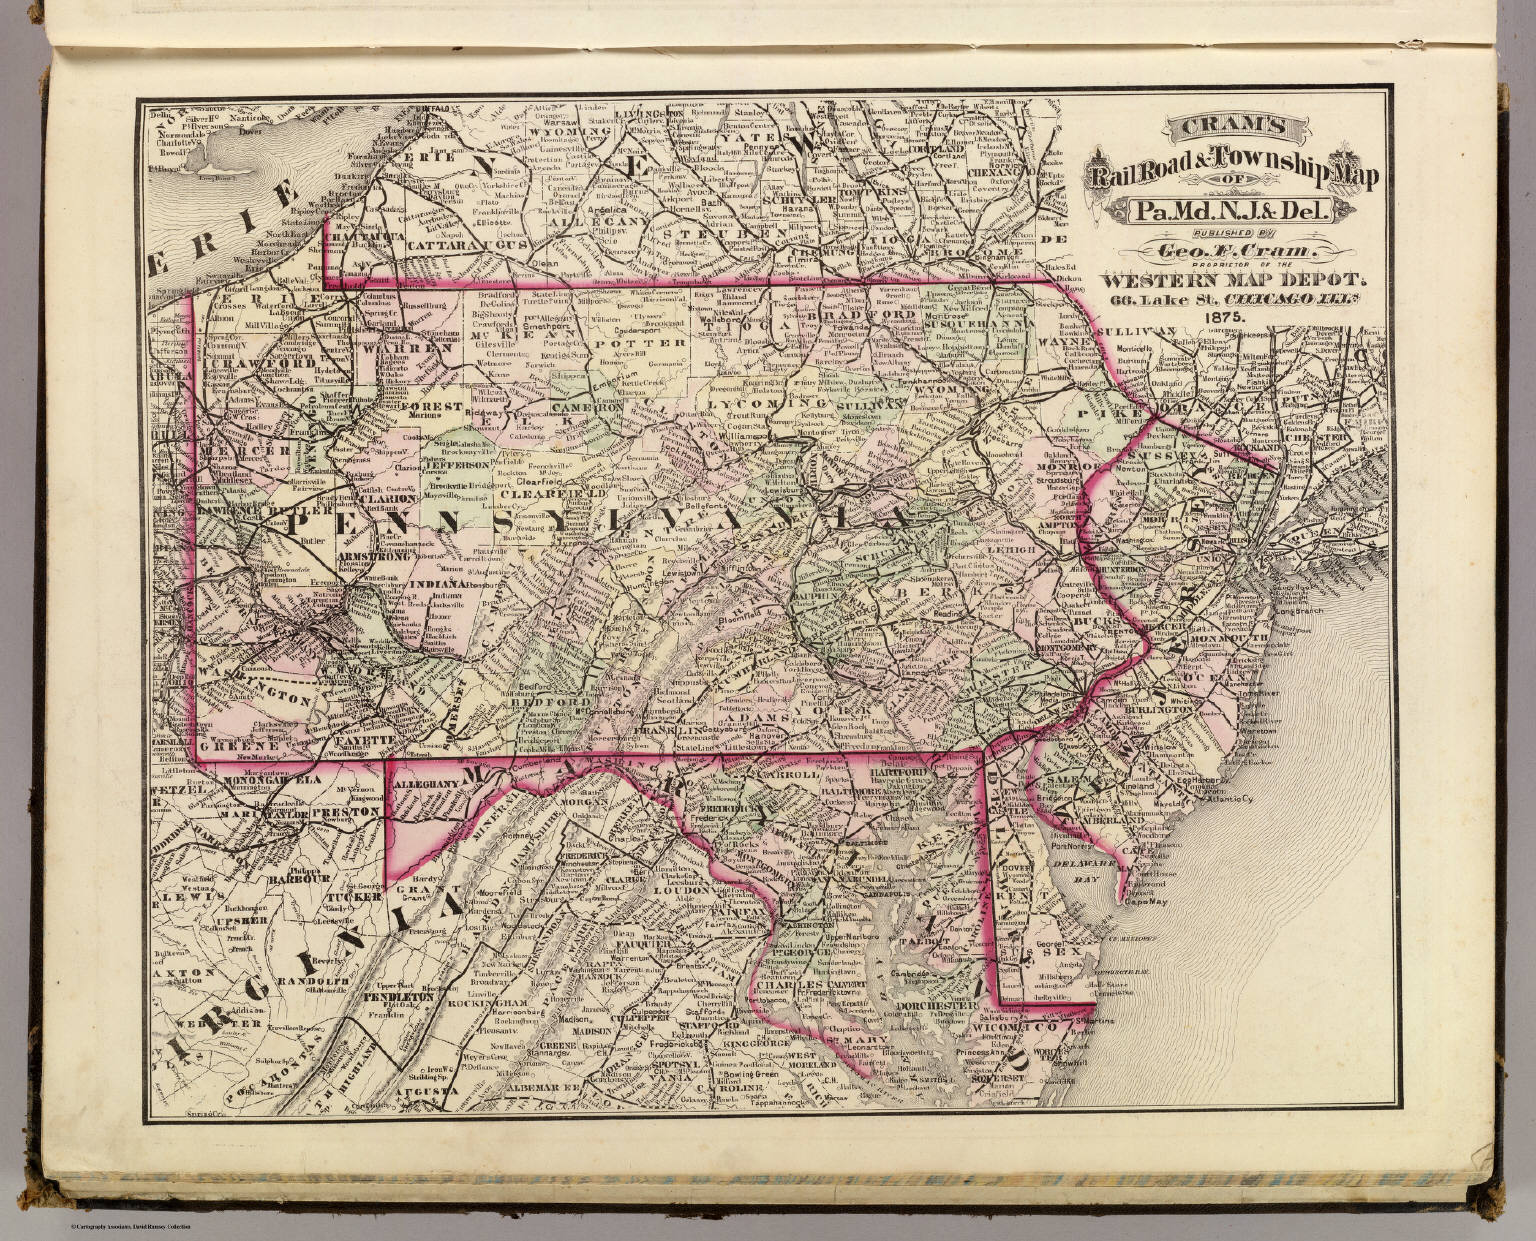 Pa Md N J Del David Rumsey Historical Map Collection